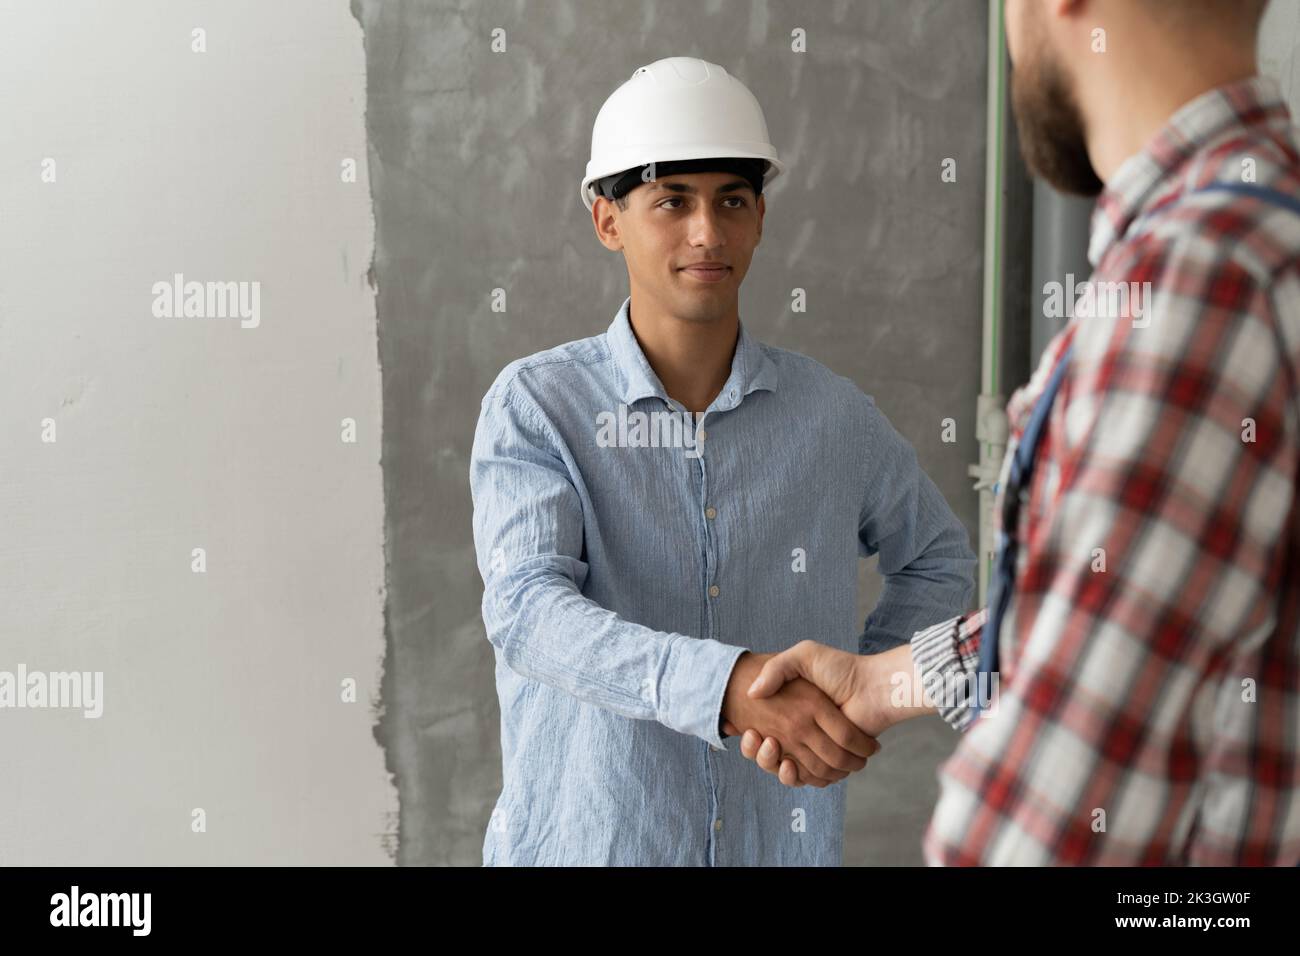 Contractor and client shaking hands with team builder in renovation site. Partnership, contractor concept Stock Photo